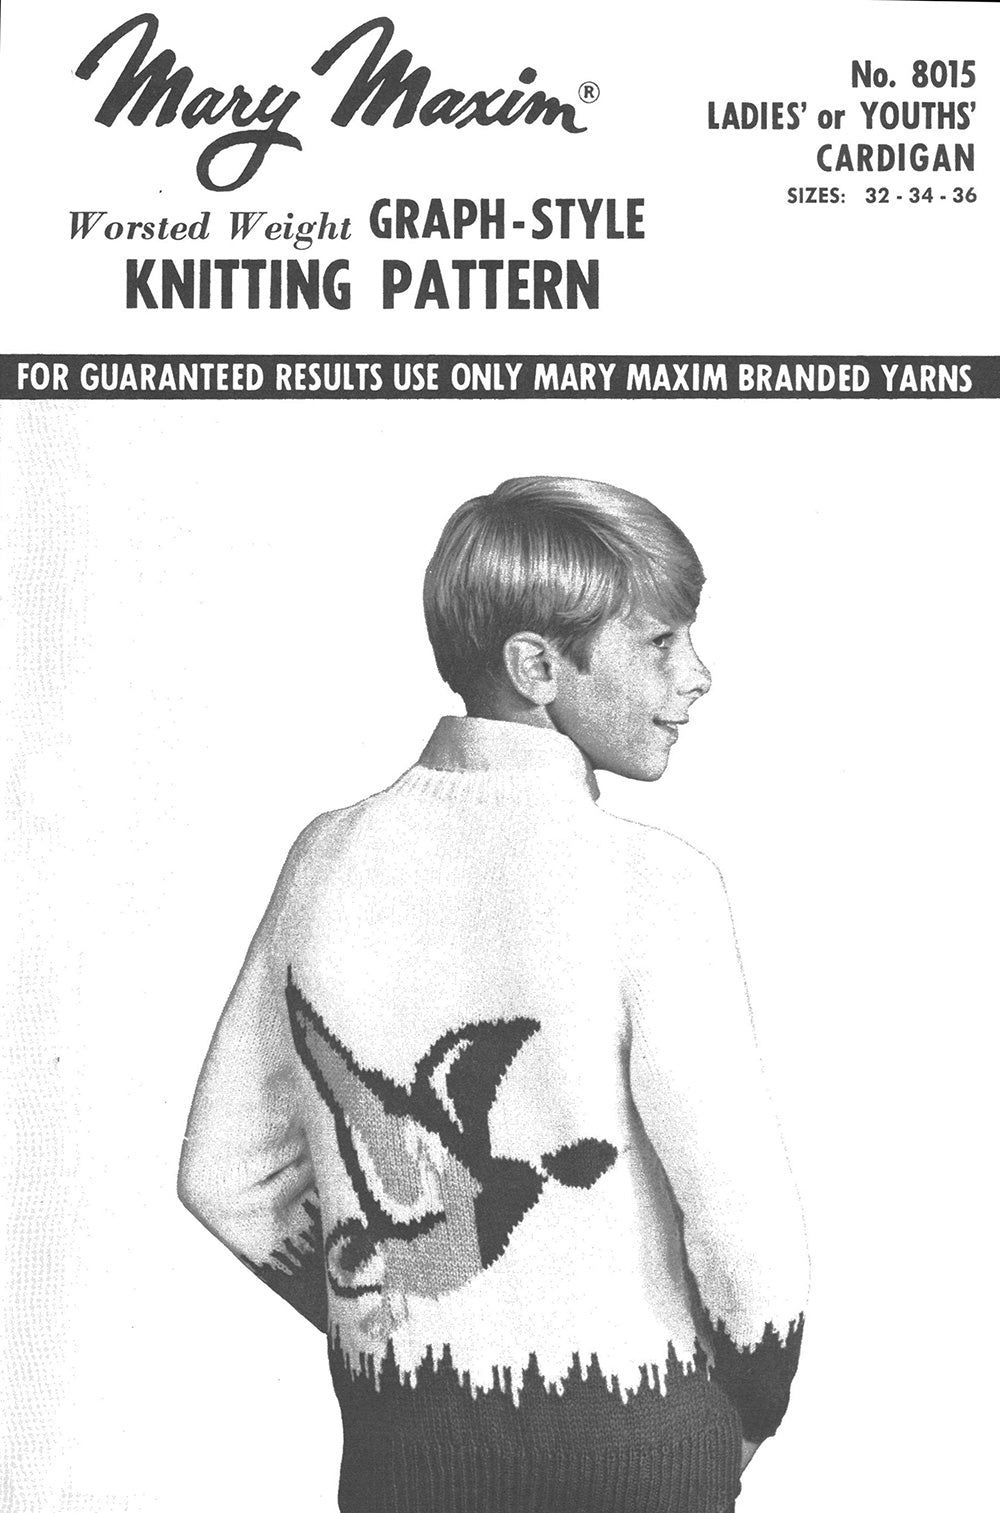 Ladies' or Youth's Cardigan Pattern